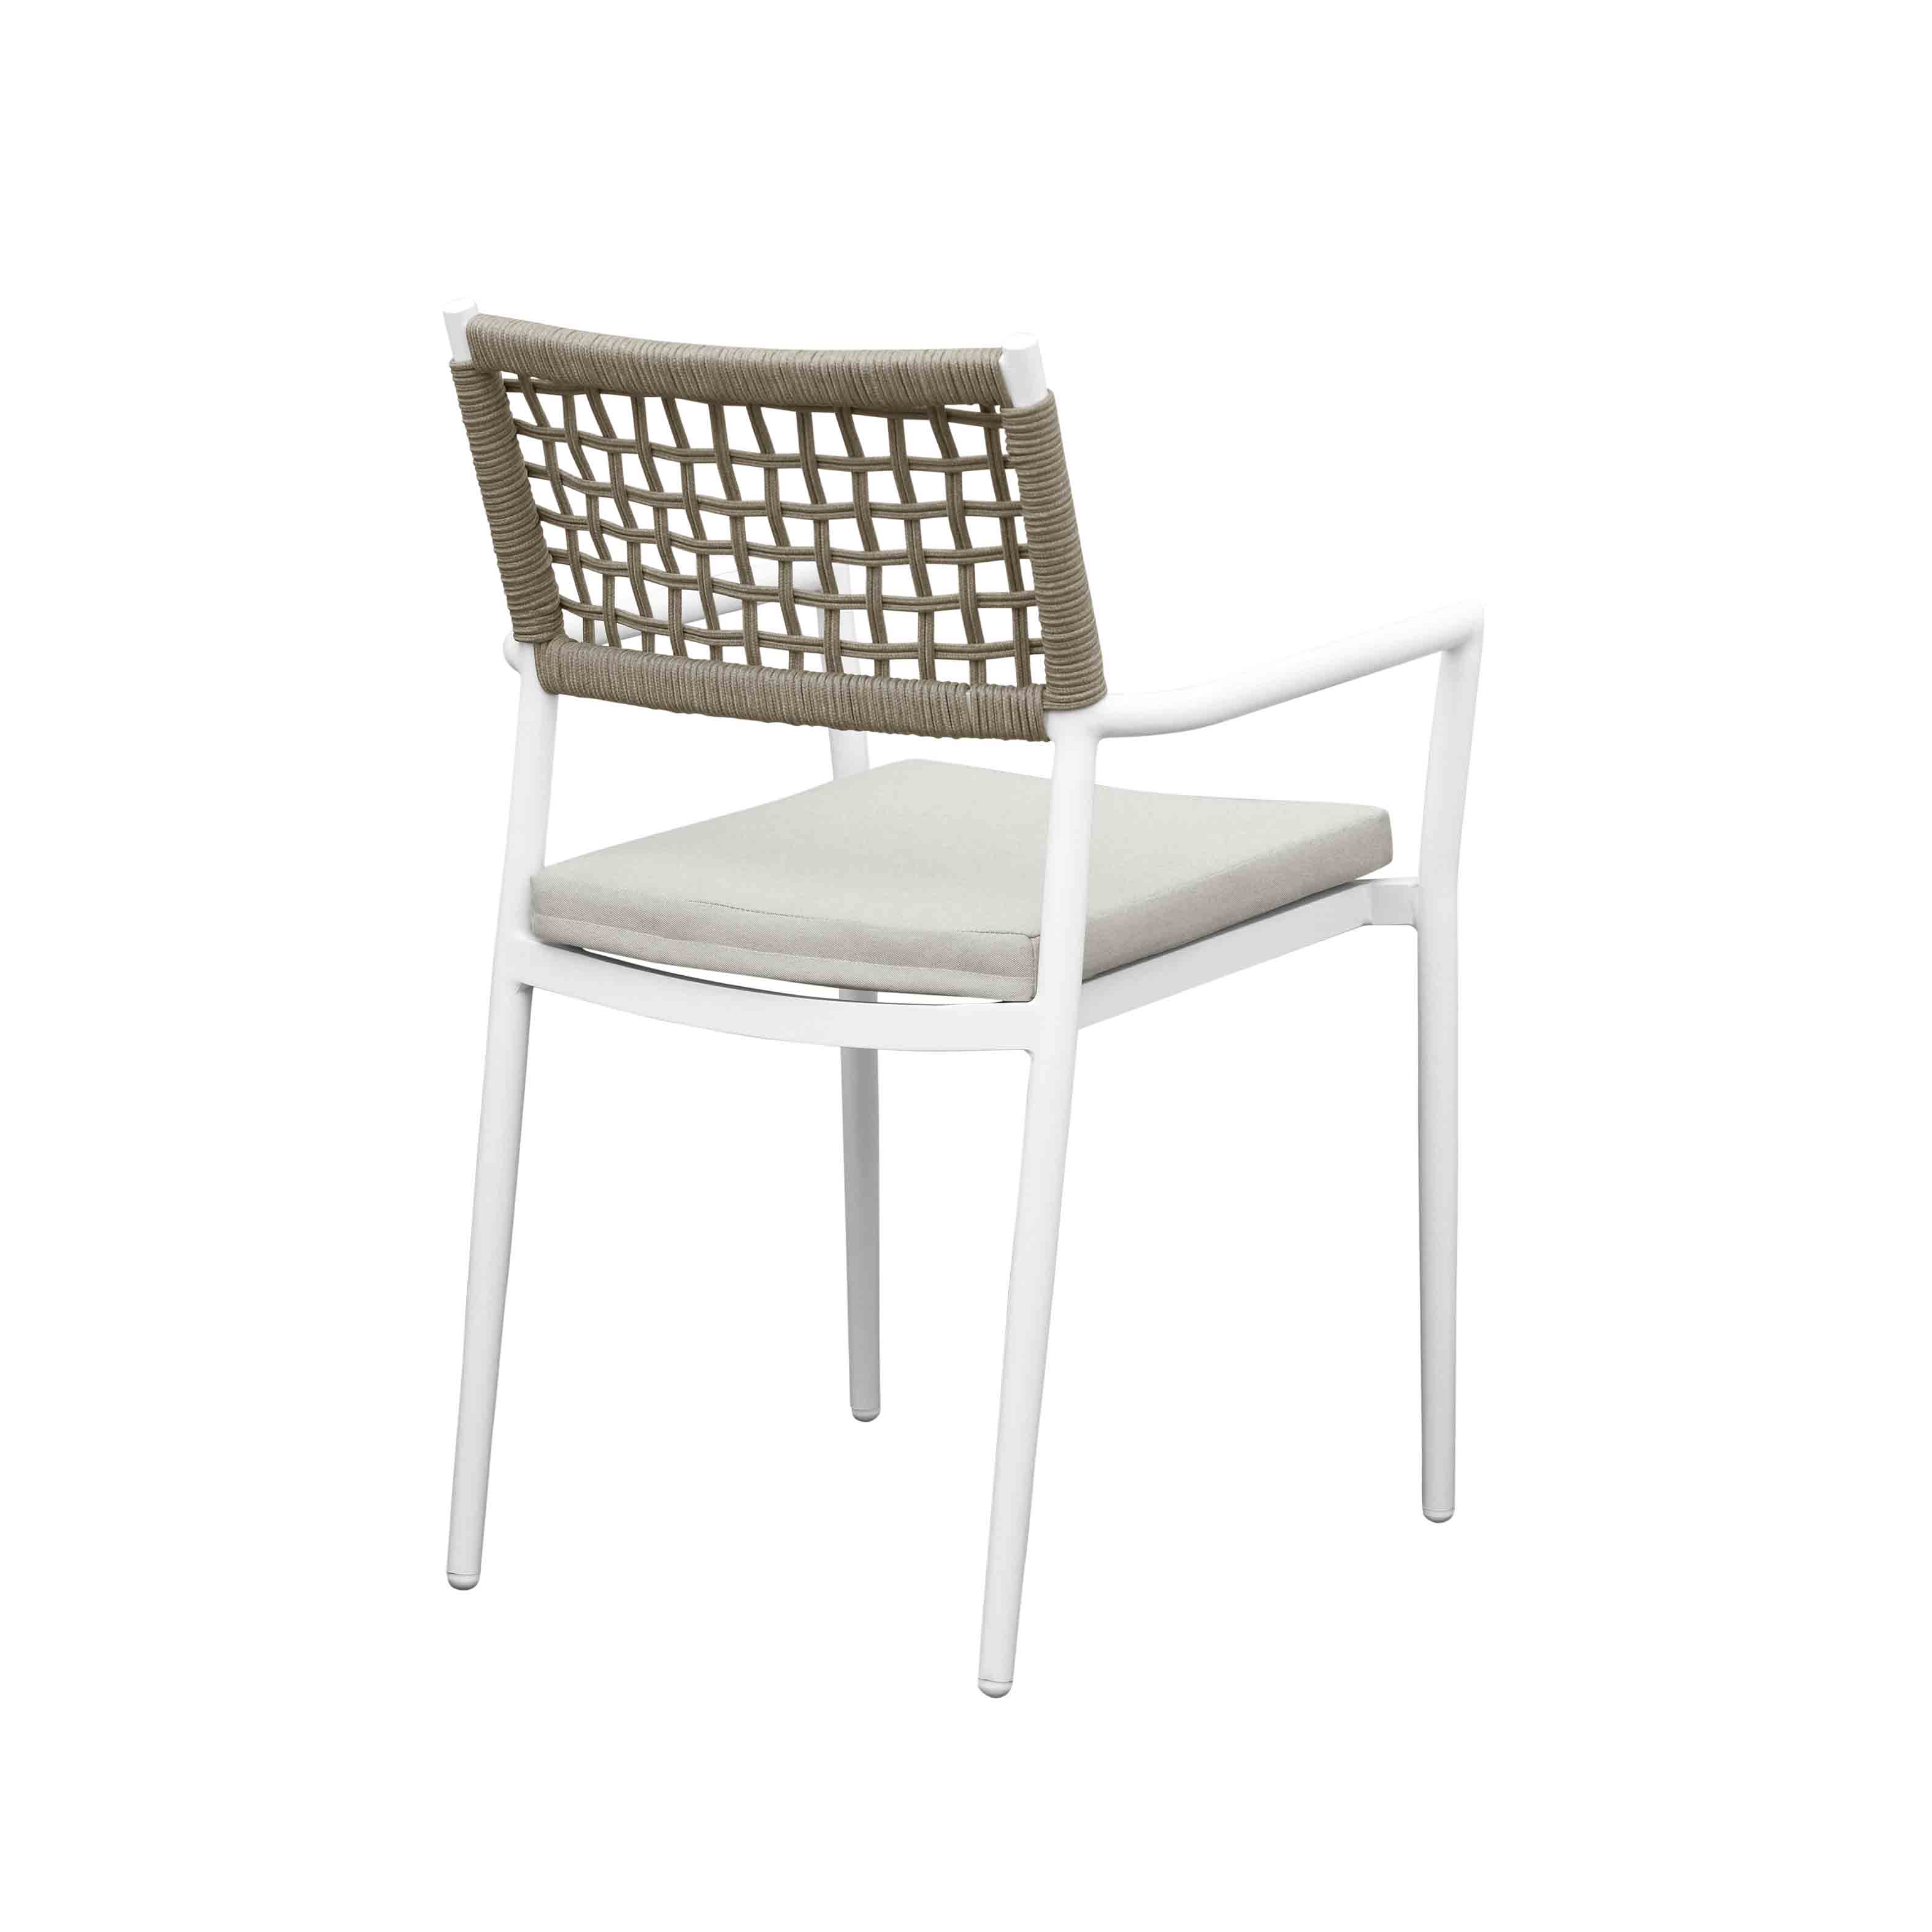 Mocha rope dining chair S2